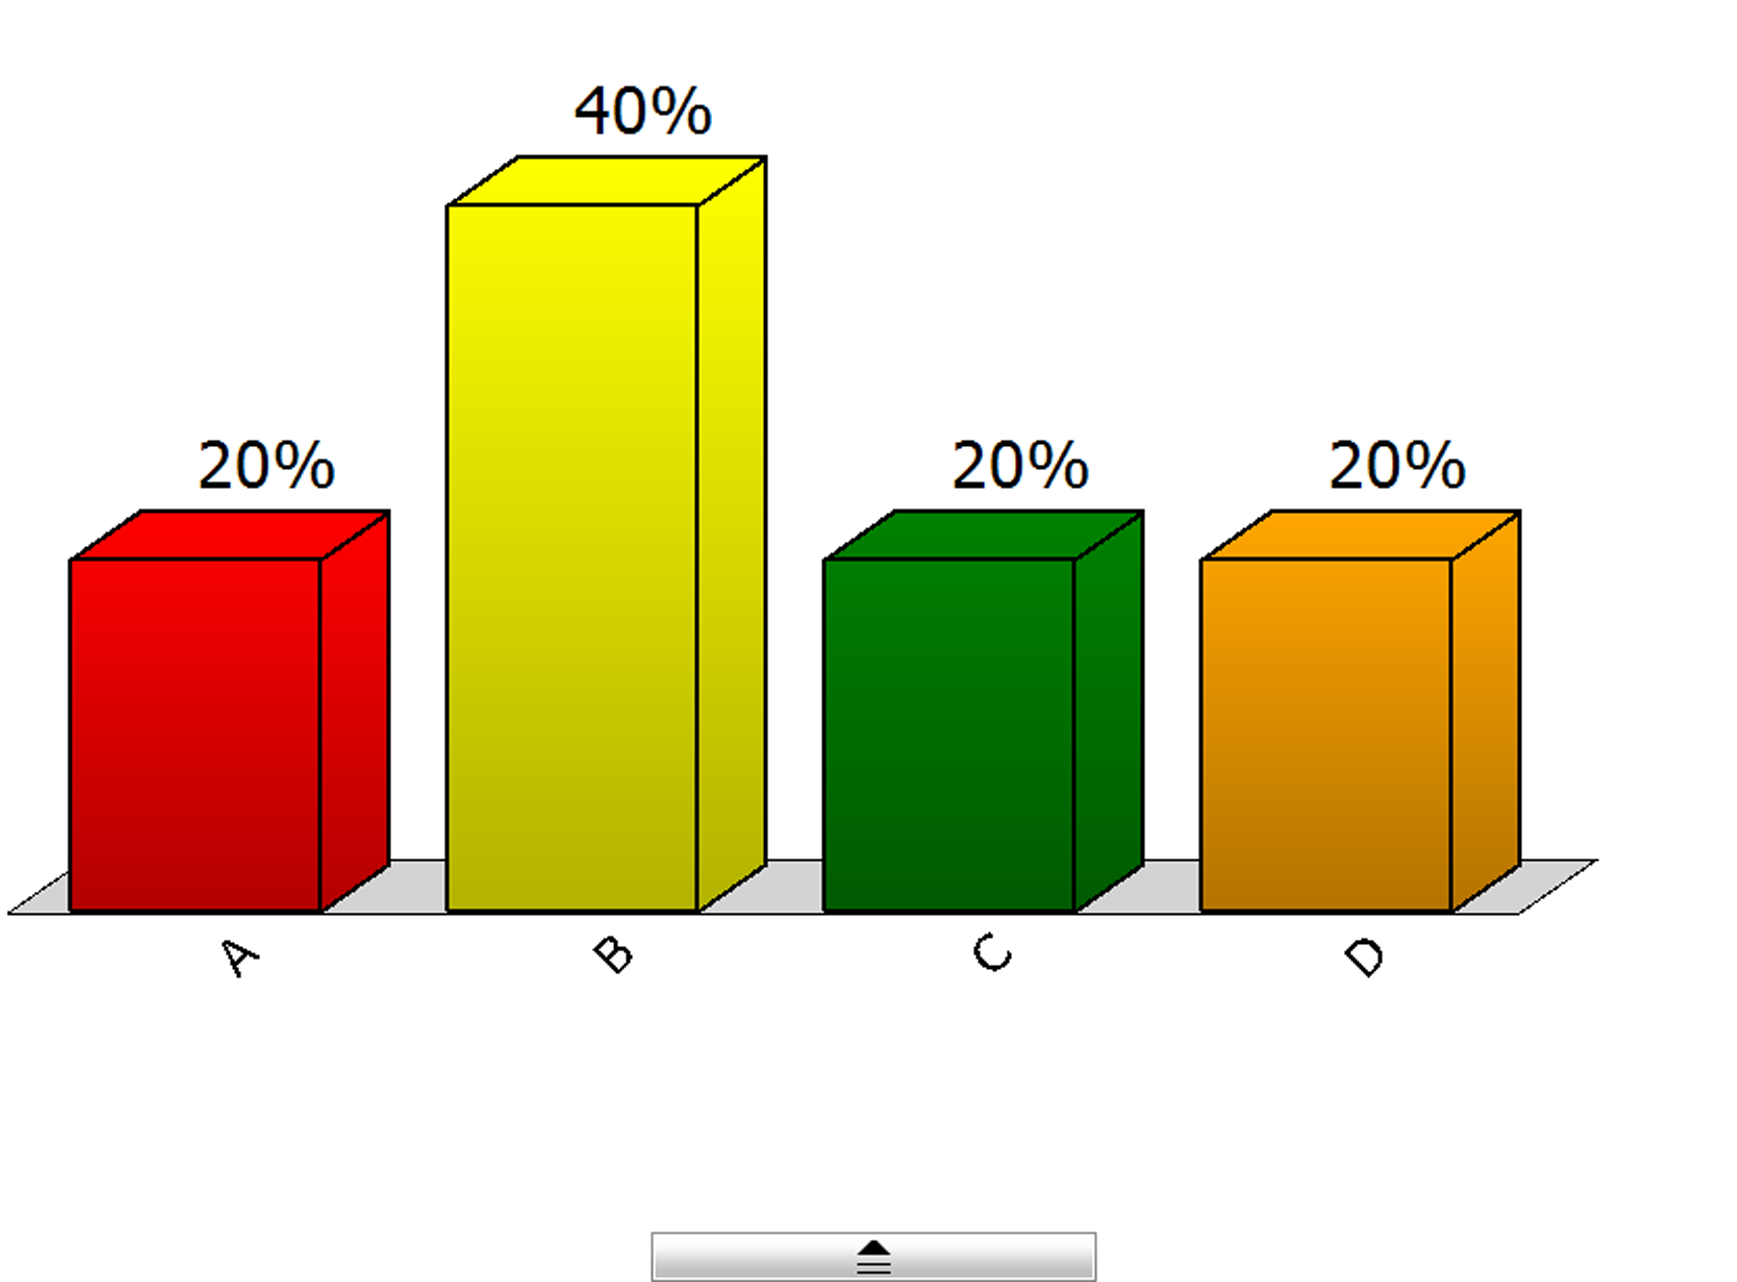 An example of the Show Results chart window showing 20 percent of the responses for Answer Choice A, 40 percent of the responses for Answer Choice B, 20 percent of the responses for Answer Choice C, and 20 percent of the responses for Answer Choice D